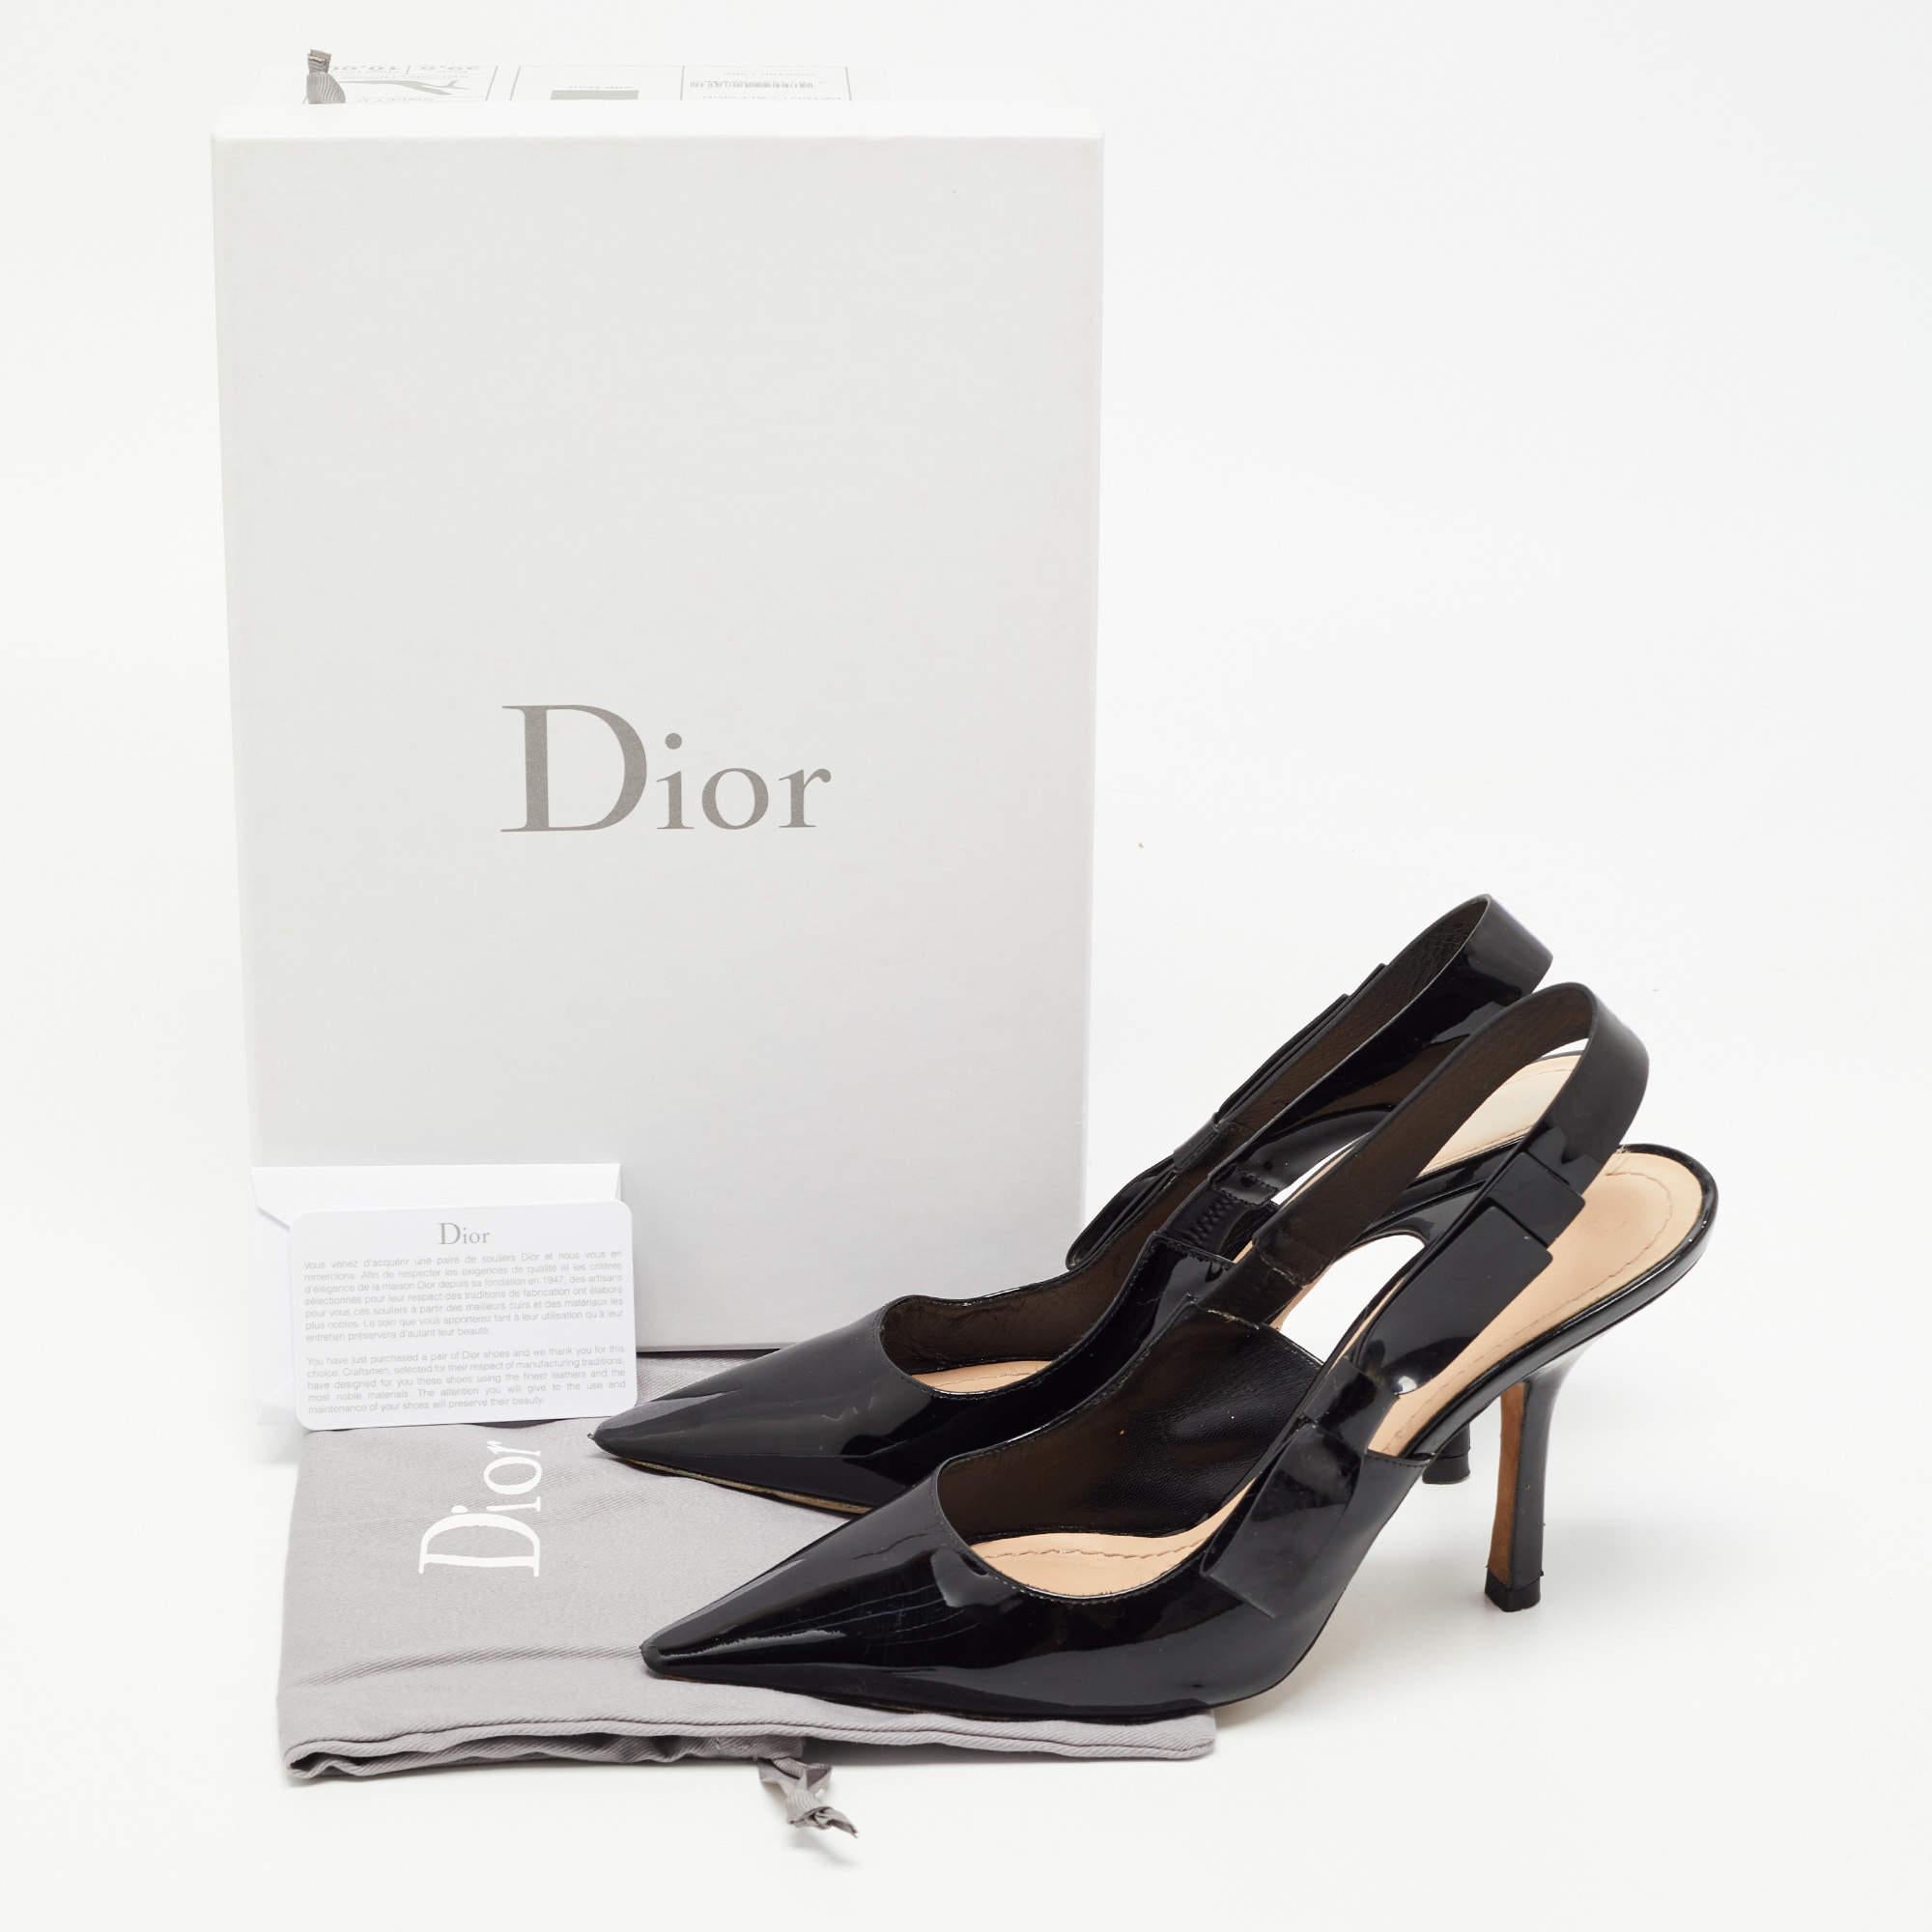 Dior Black Patent Leather Bow Slingback Pumps Size 39.5 6